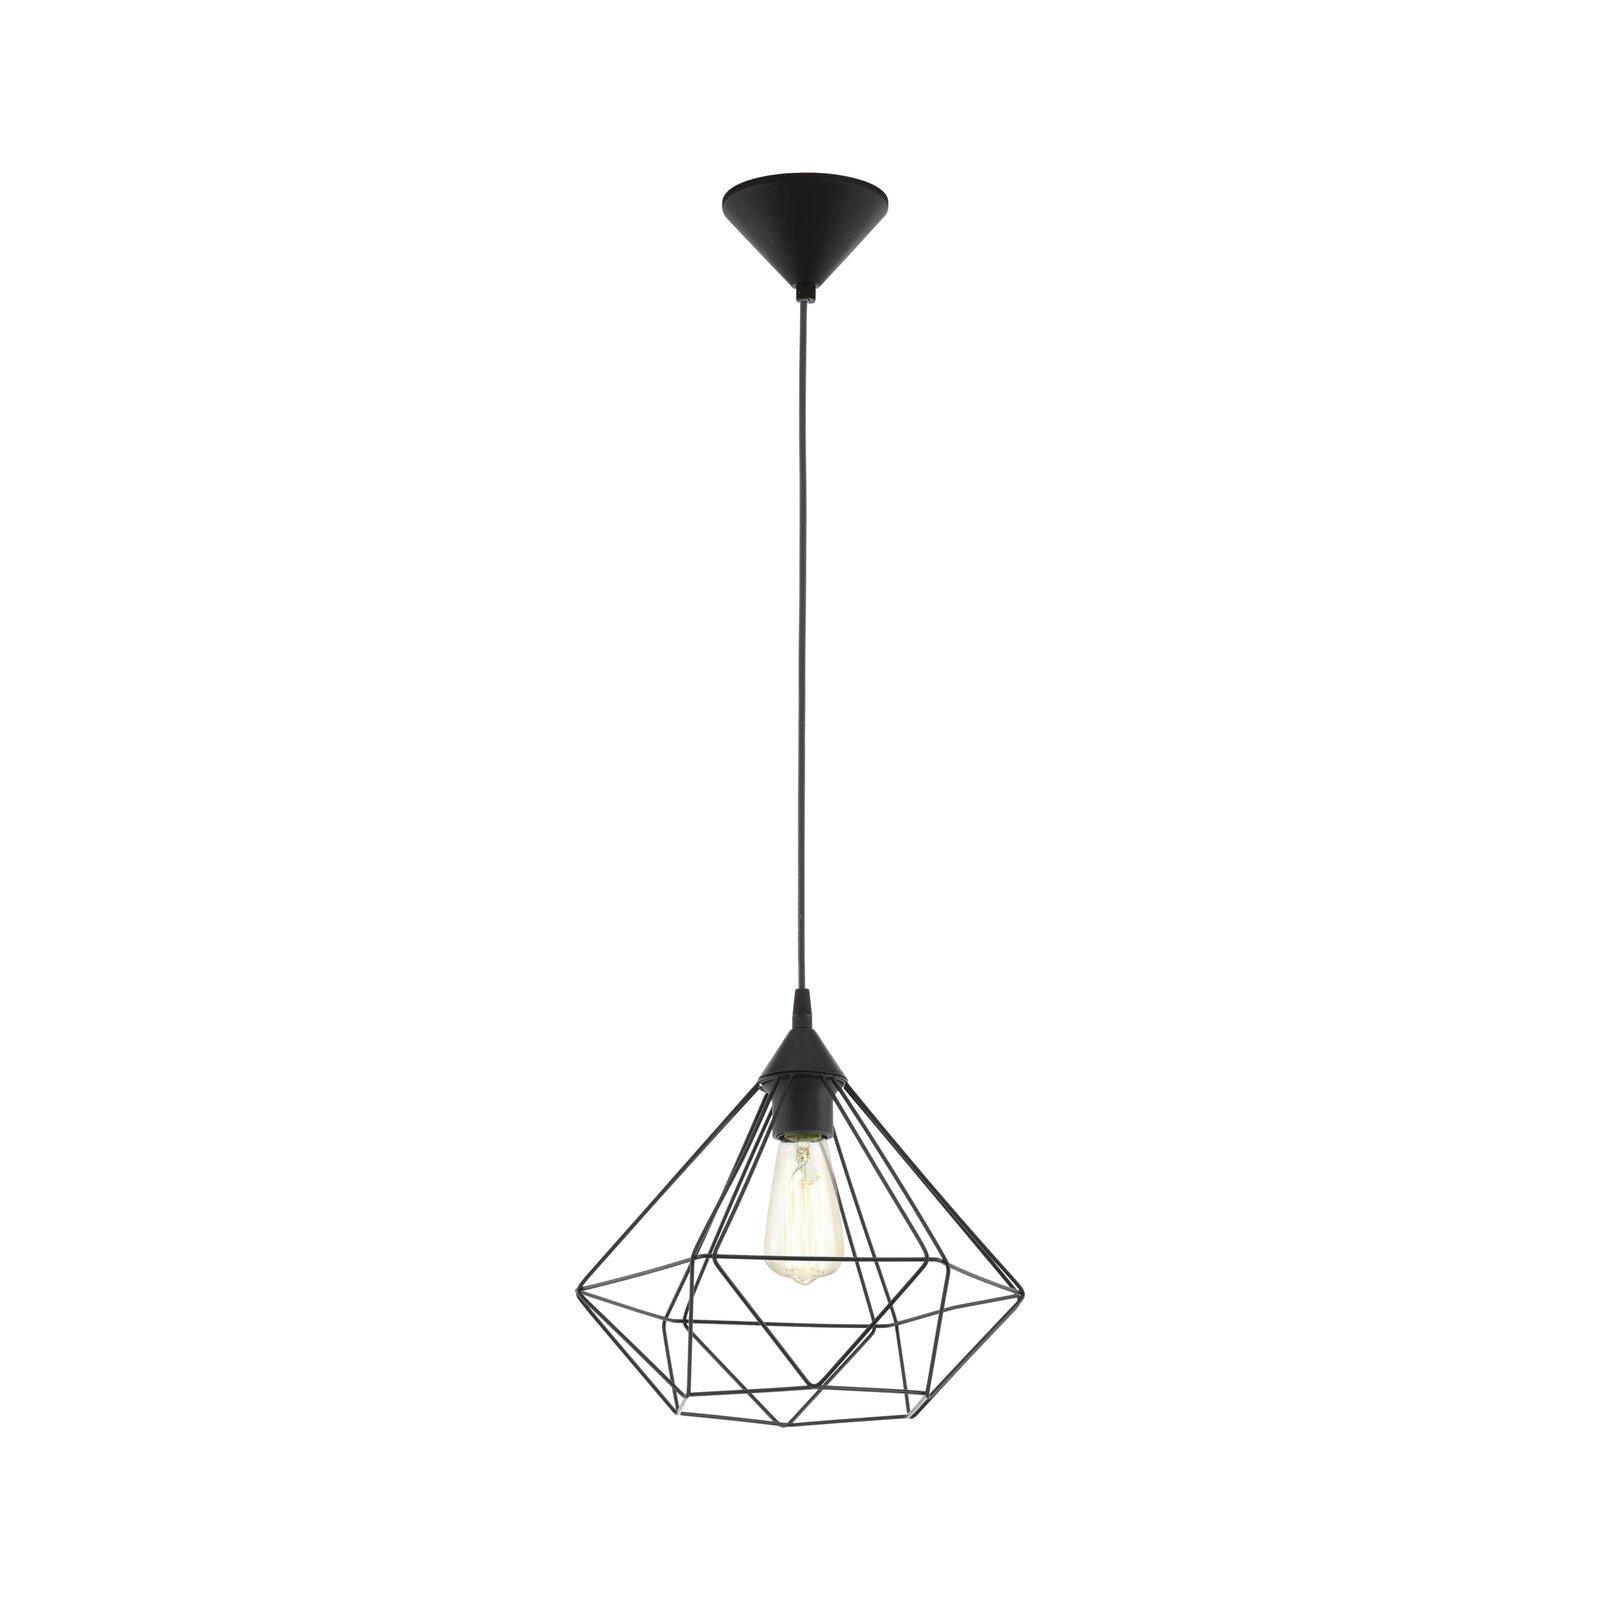 Hanging Ceiling Pendant Light Black Wire Cage 1x E27 Hallway Feature Lamp